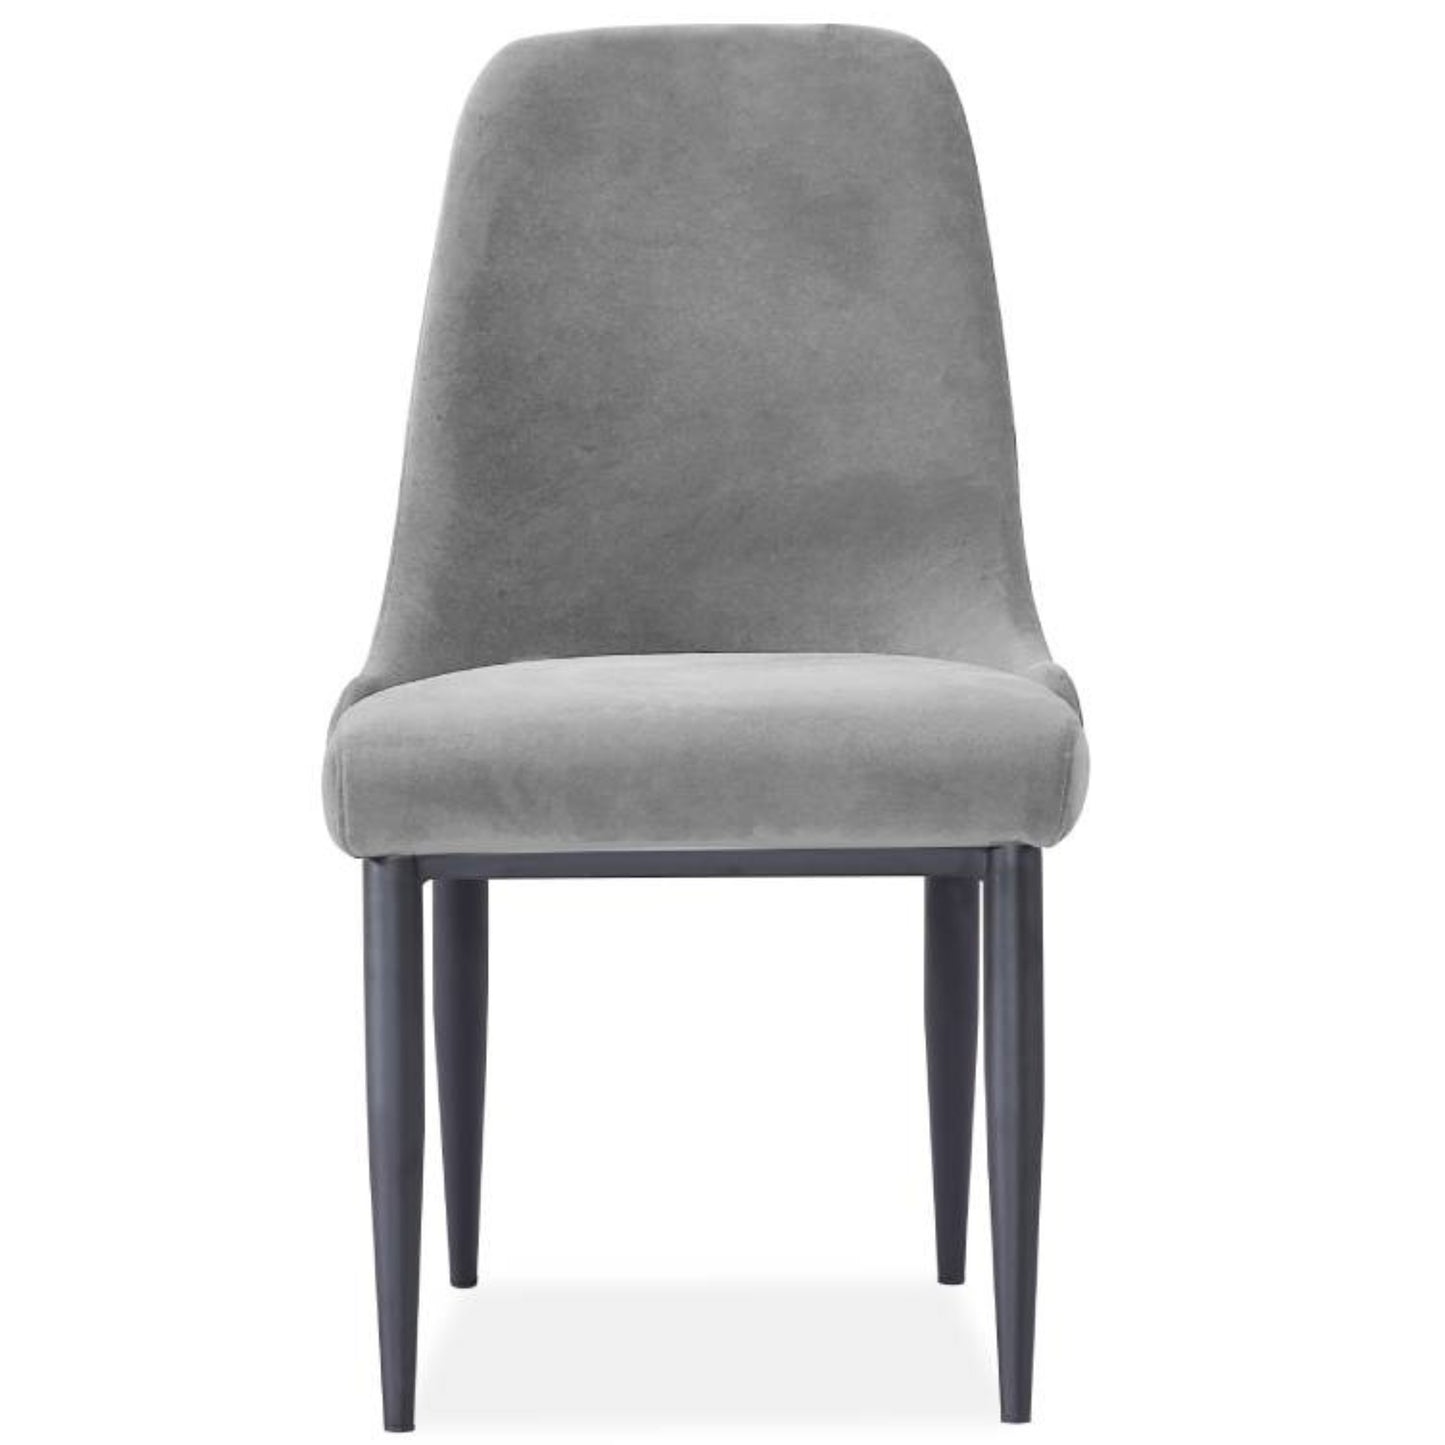 Eva Dining Chair Set of 2 Fabric Seat with Metal Frame - Grey